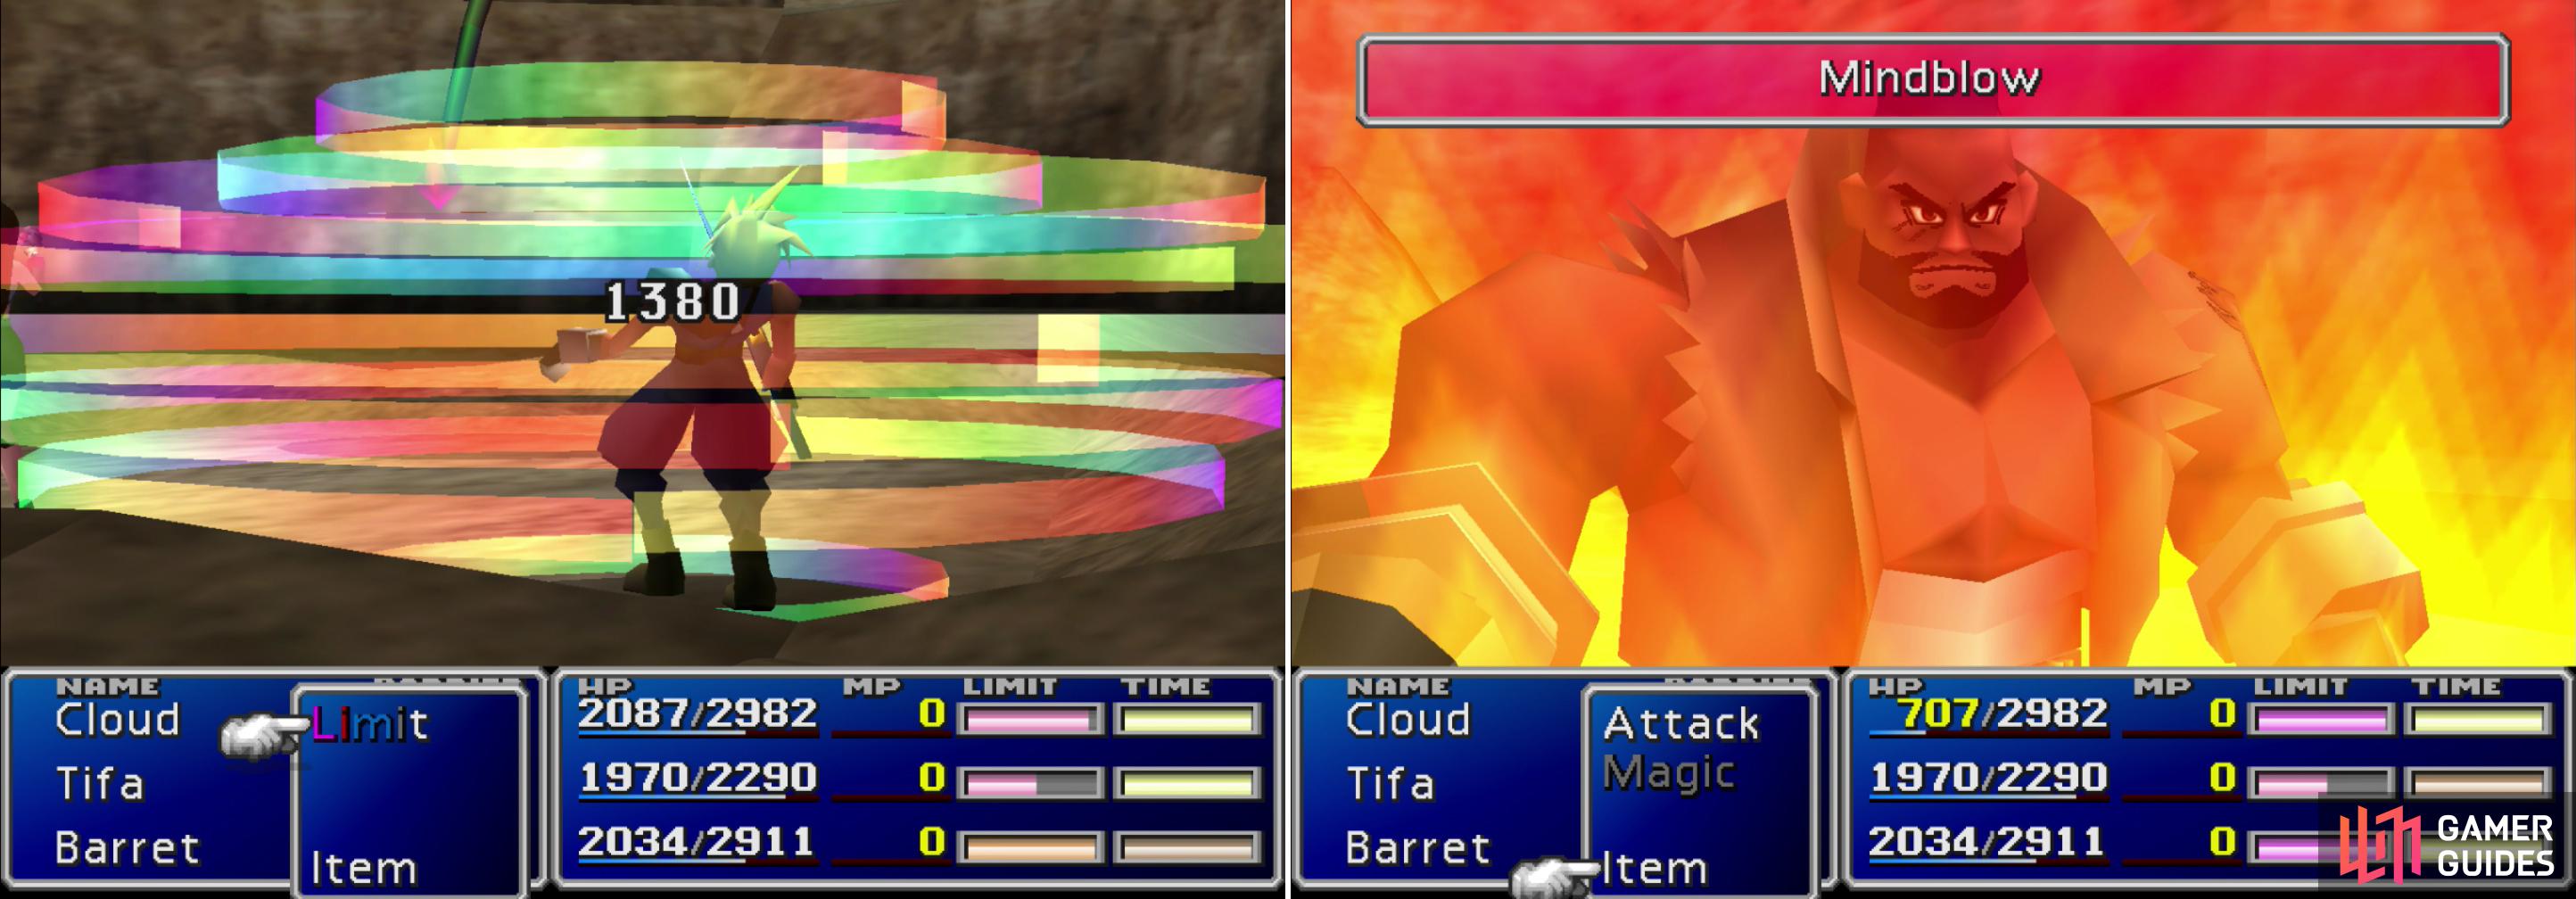 Rapps’ “Aero 3” attack can deal some wicked damage (left), but Barret’s Mind Blow Limit Break will deplete Rapps’ MP and deprive him of this attack (right).